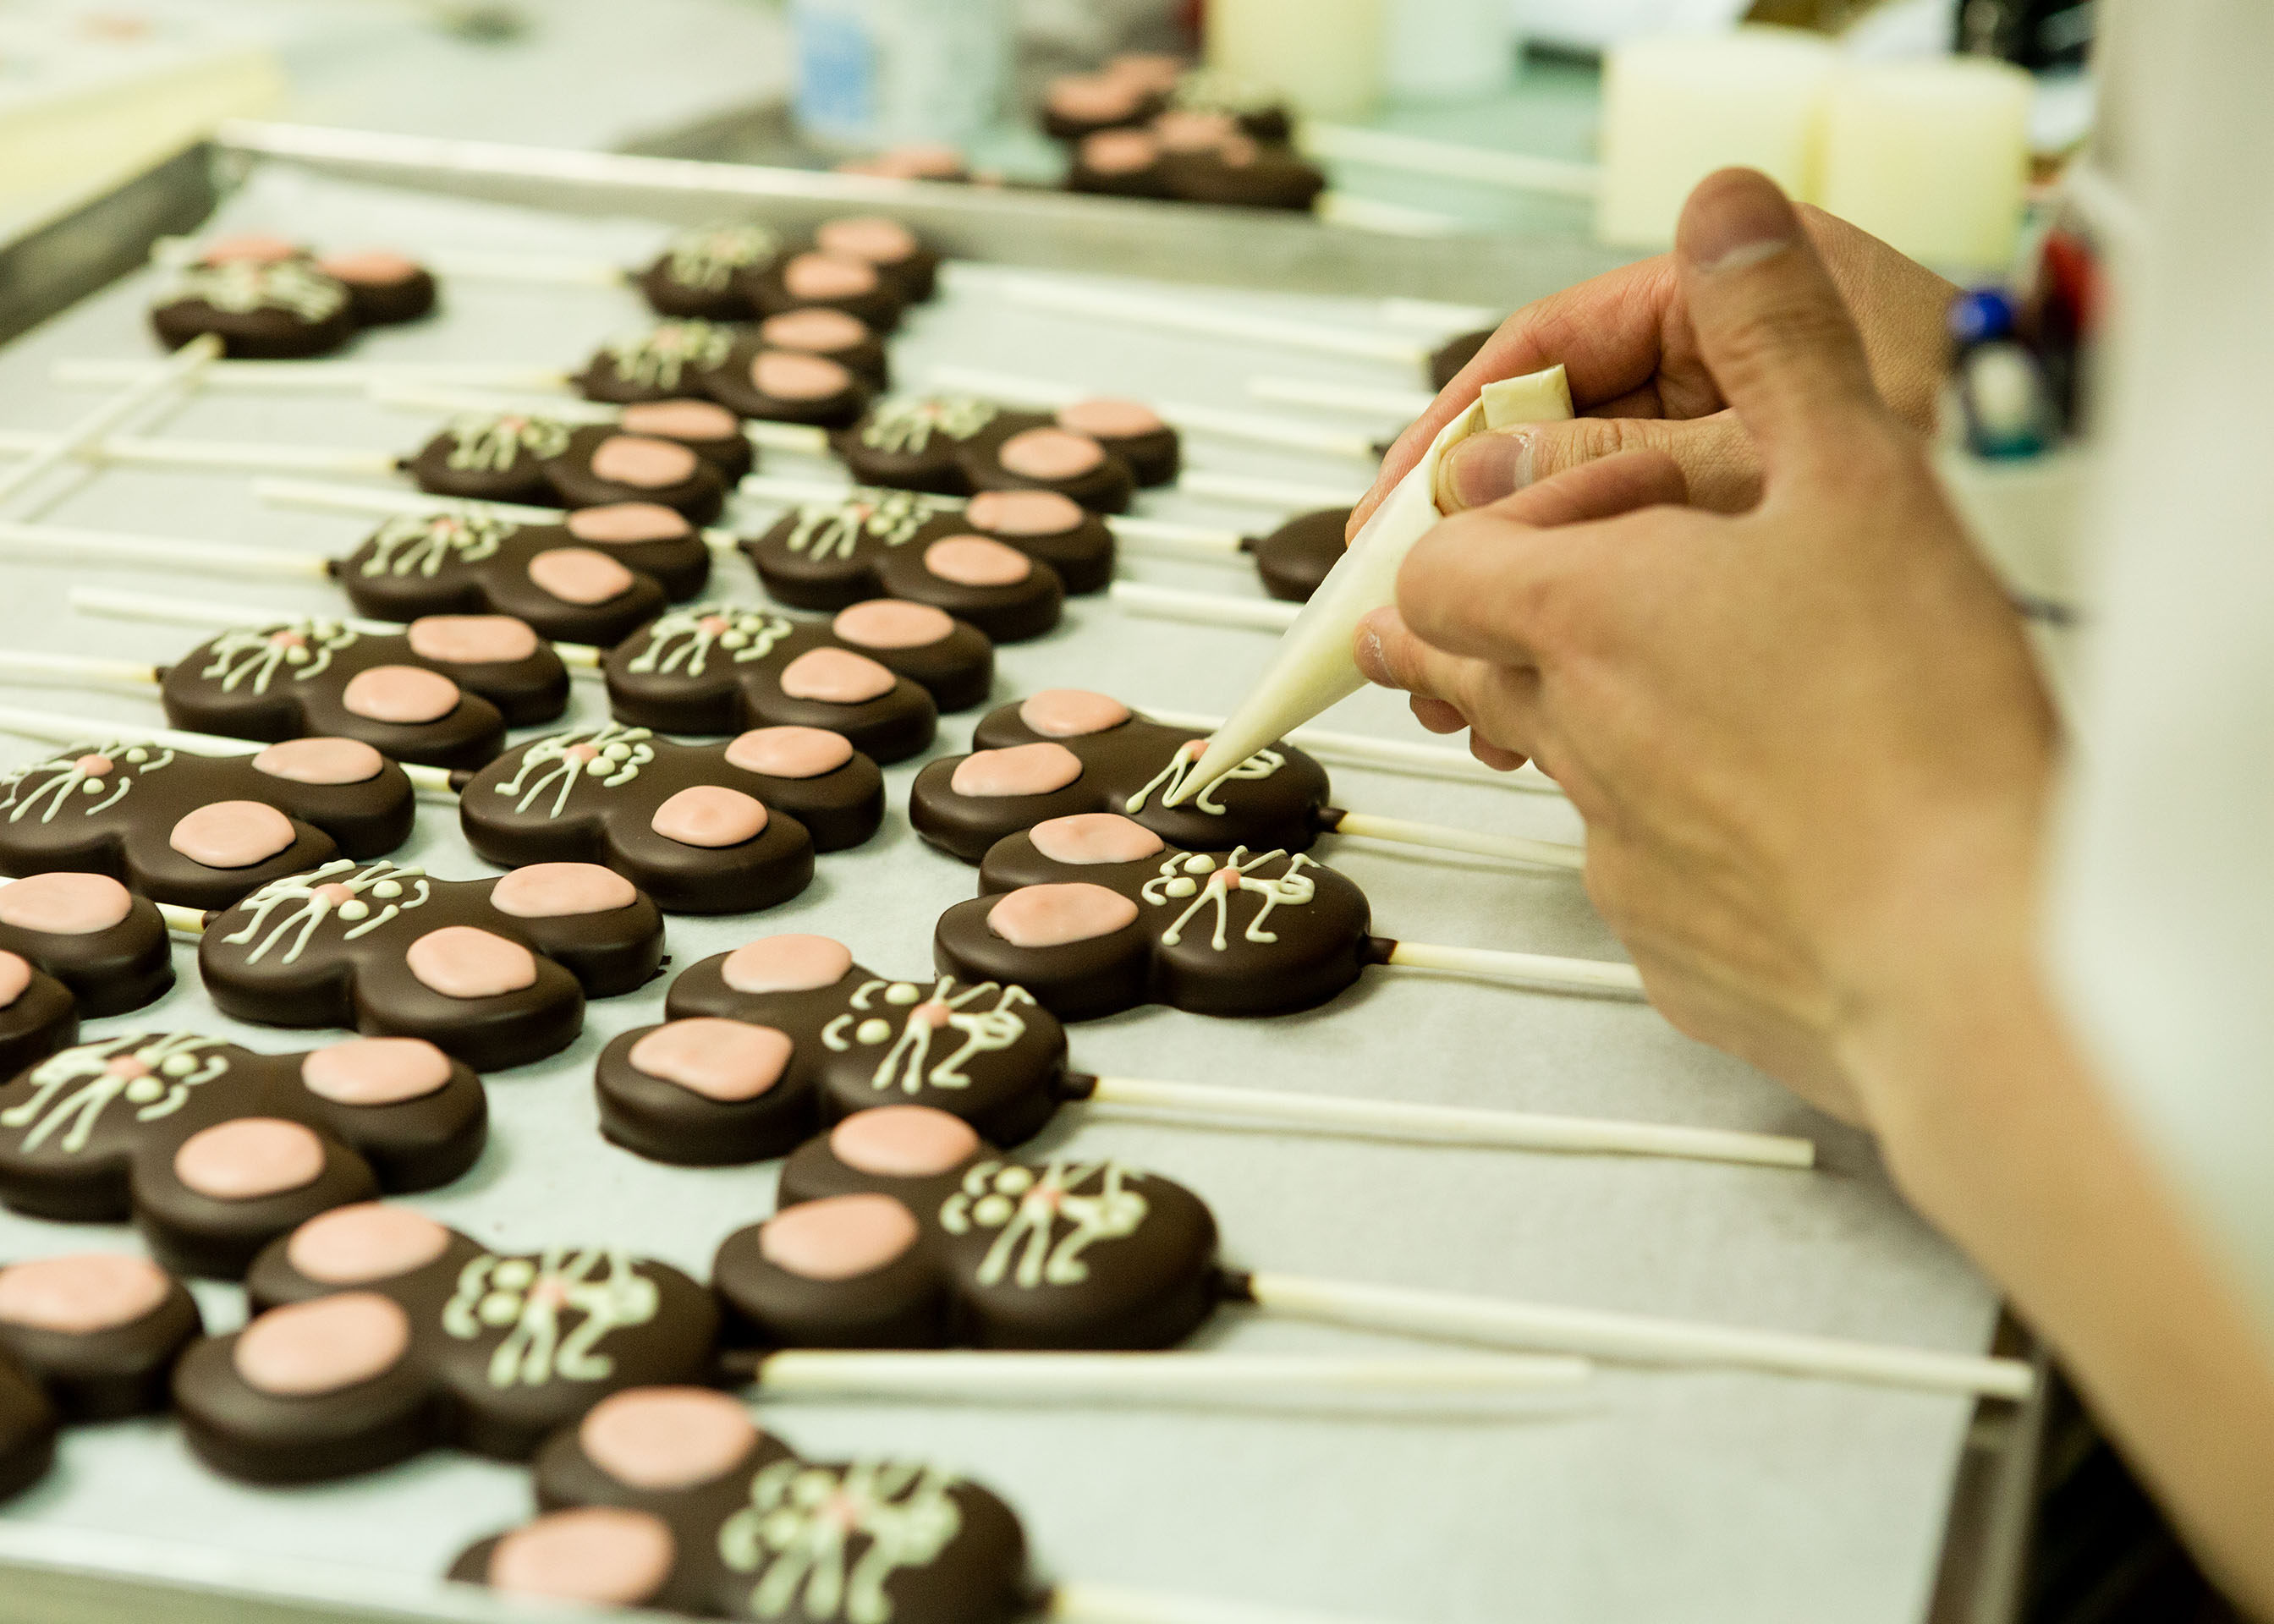 Gourmet House has been making chocolates, pastries and breads using traditional Swiss recipes since 1994. Photo: Handout